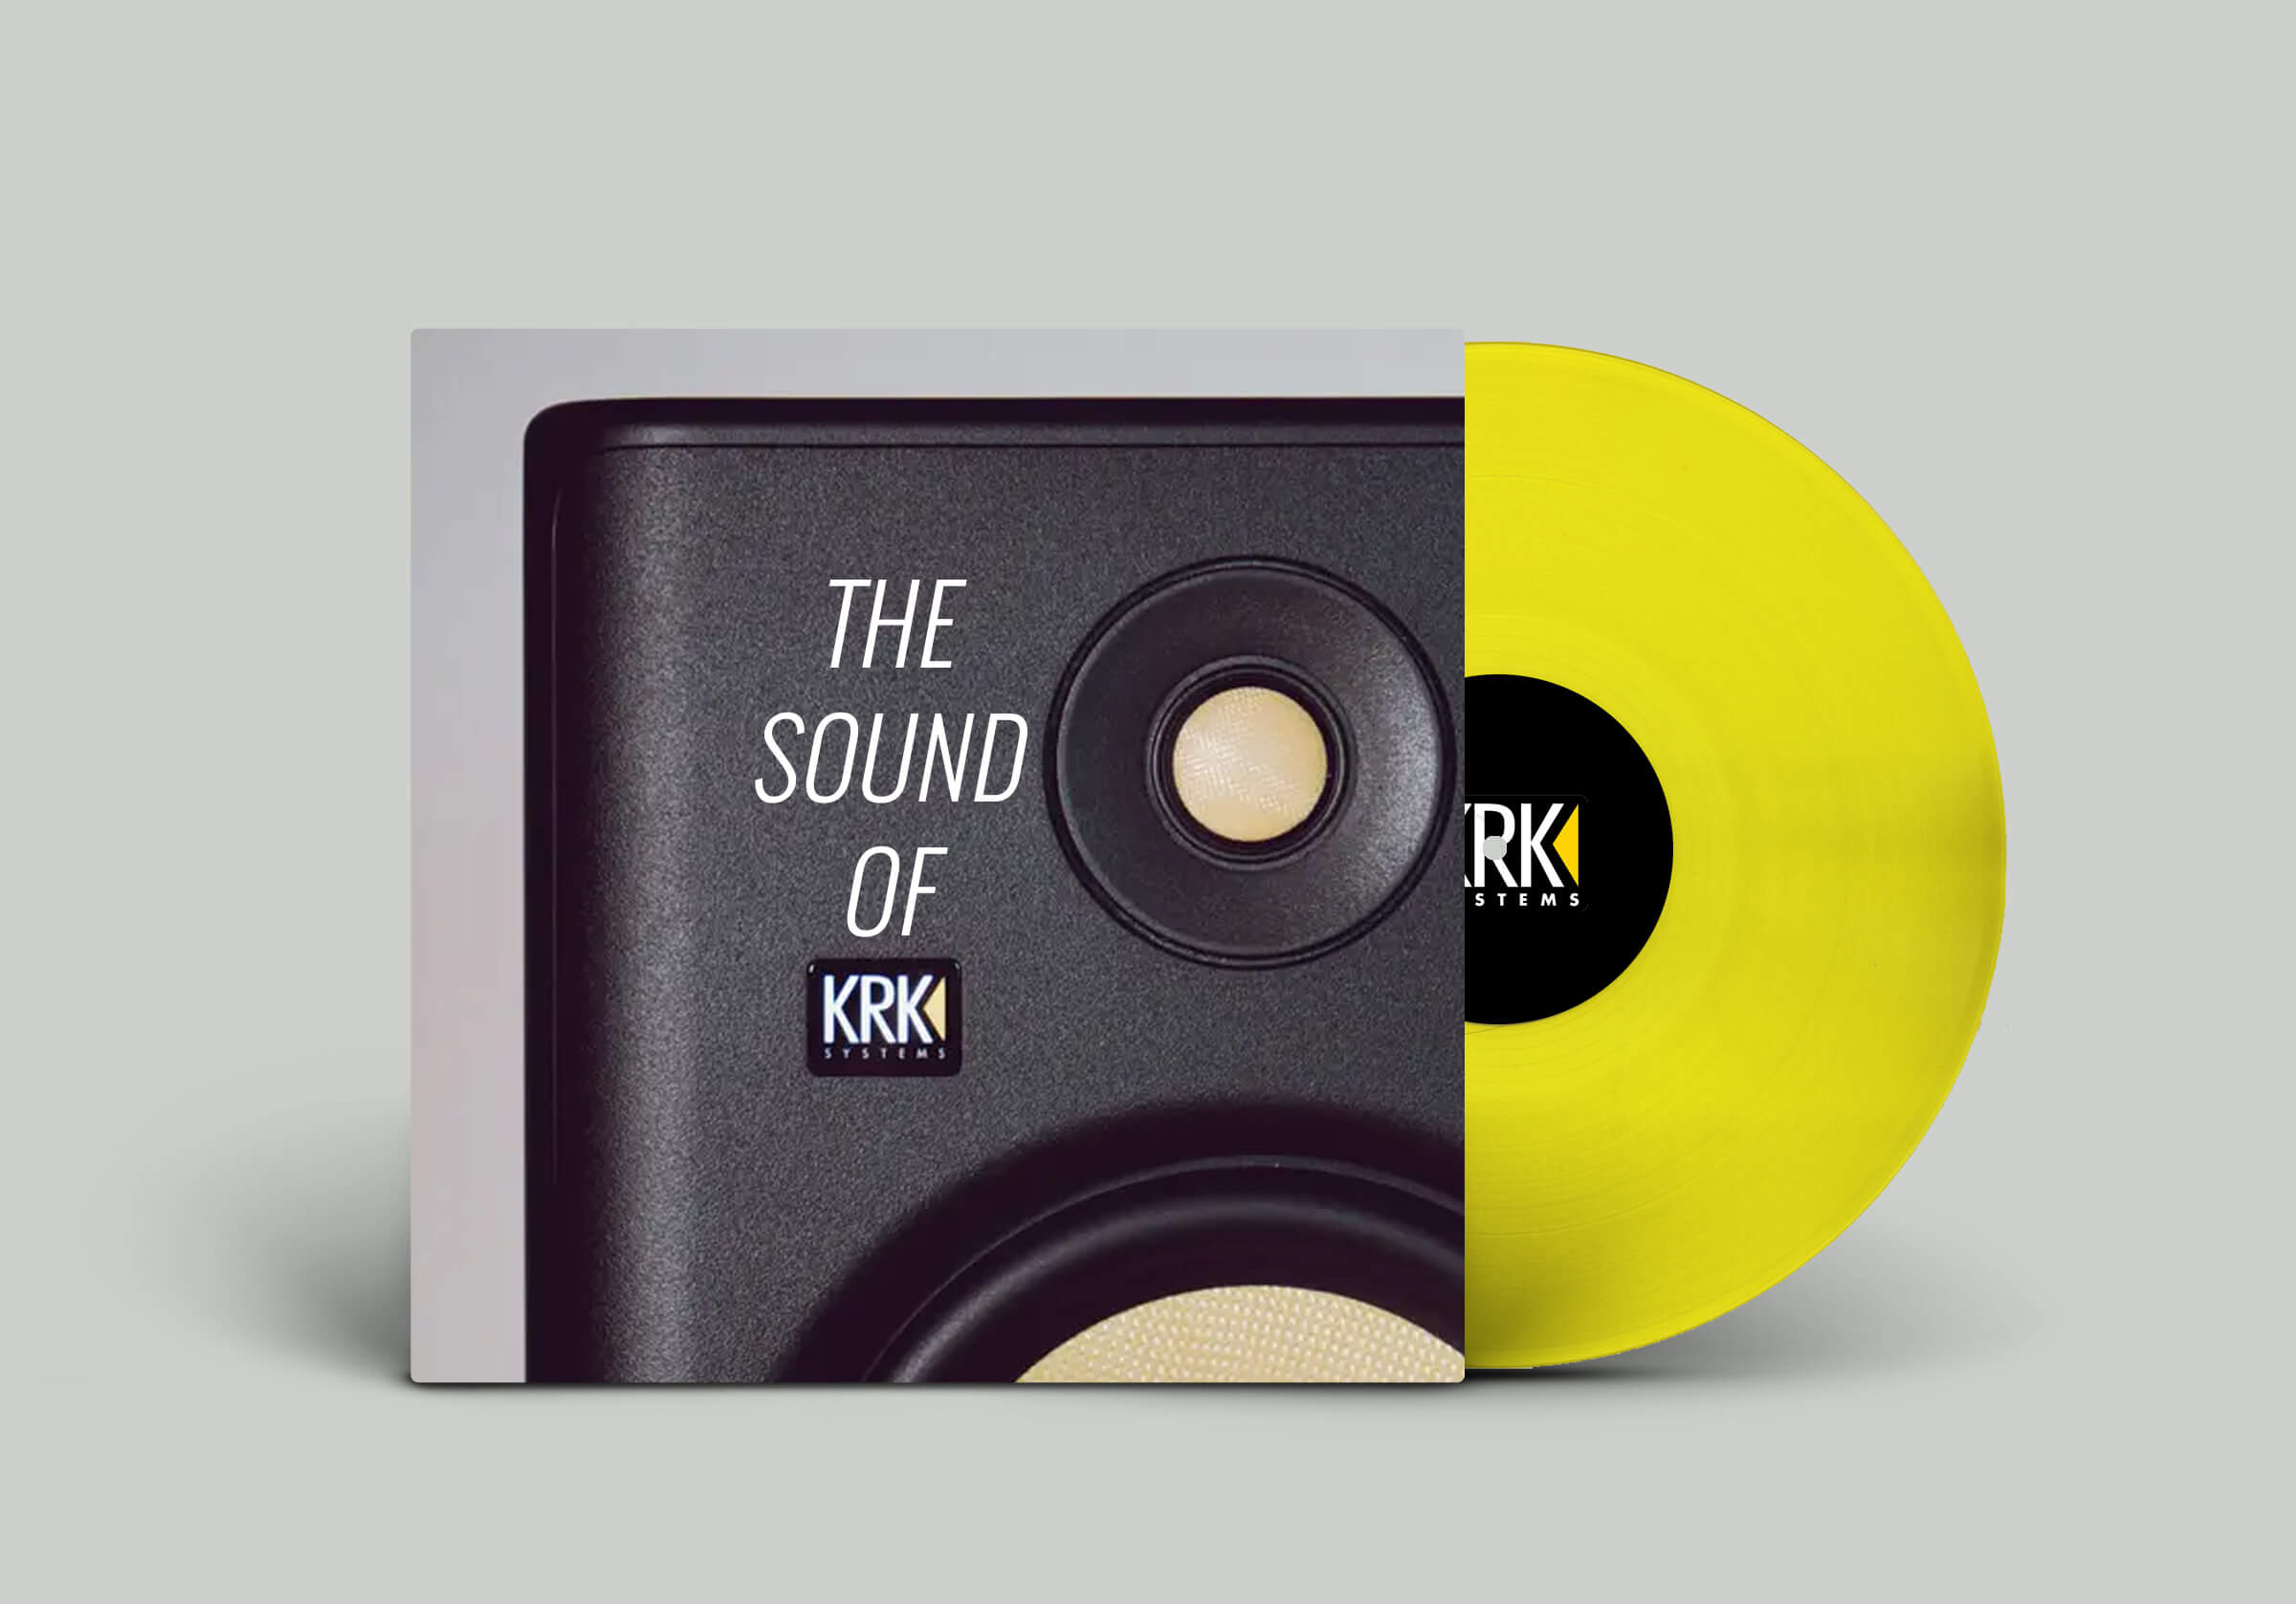 Win New Gear PLUS Get Featured on “The Sound of KRK” Vinyl